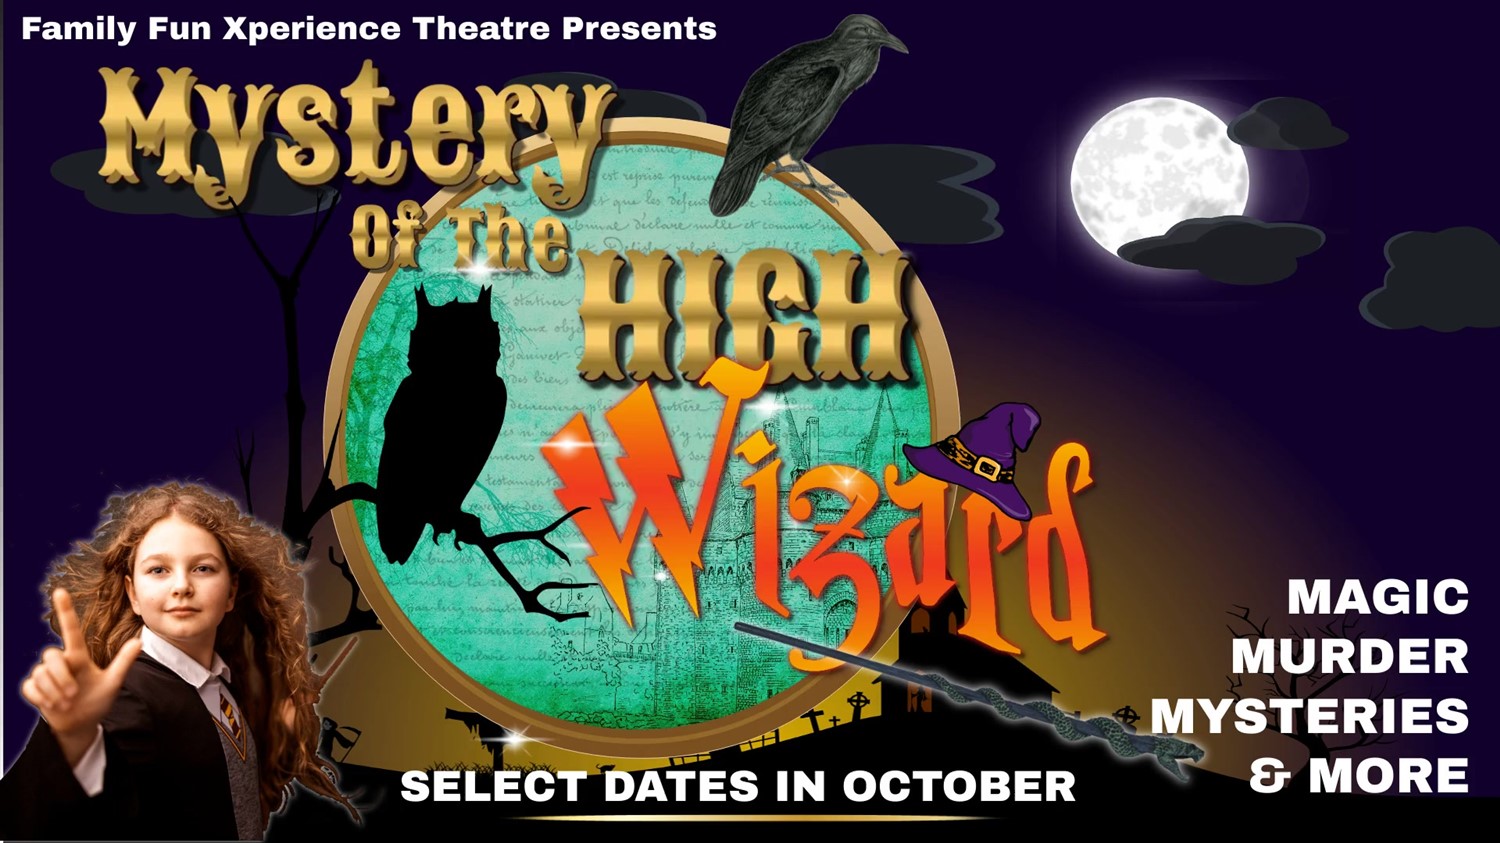 🗝 MYSTERY of the HIGH WIZARD⚡️ Magic, Murder, Mysteries, and More to solve! on oct. 29, 19:00@FFX Theatre - Elegir asientoCompra entradas y obtén información enFamily Fun Xperience tickets.ffxshow.org